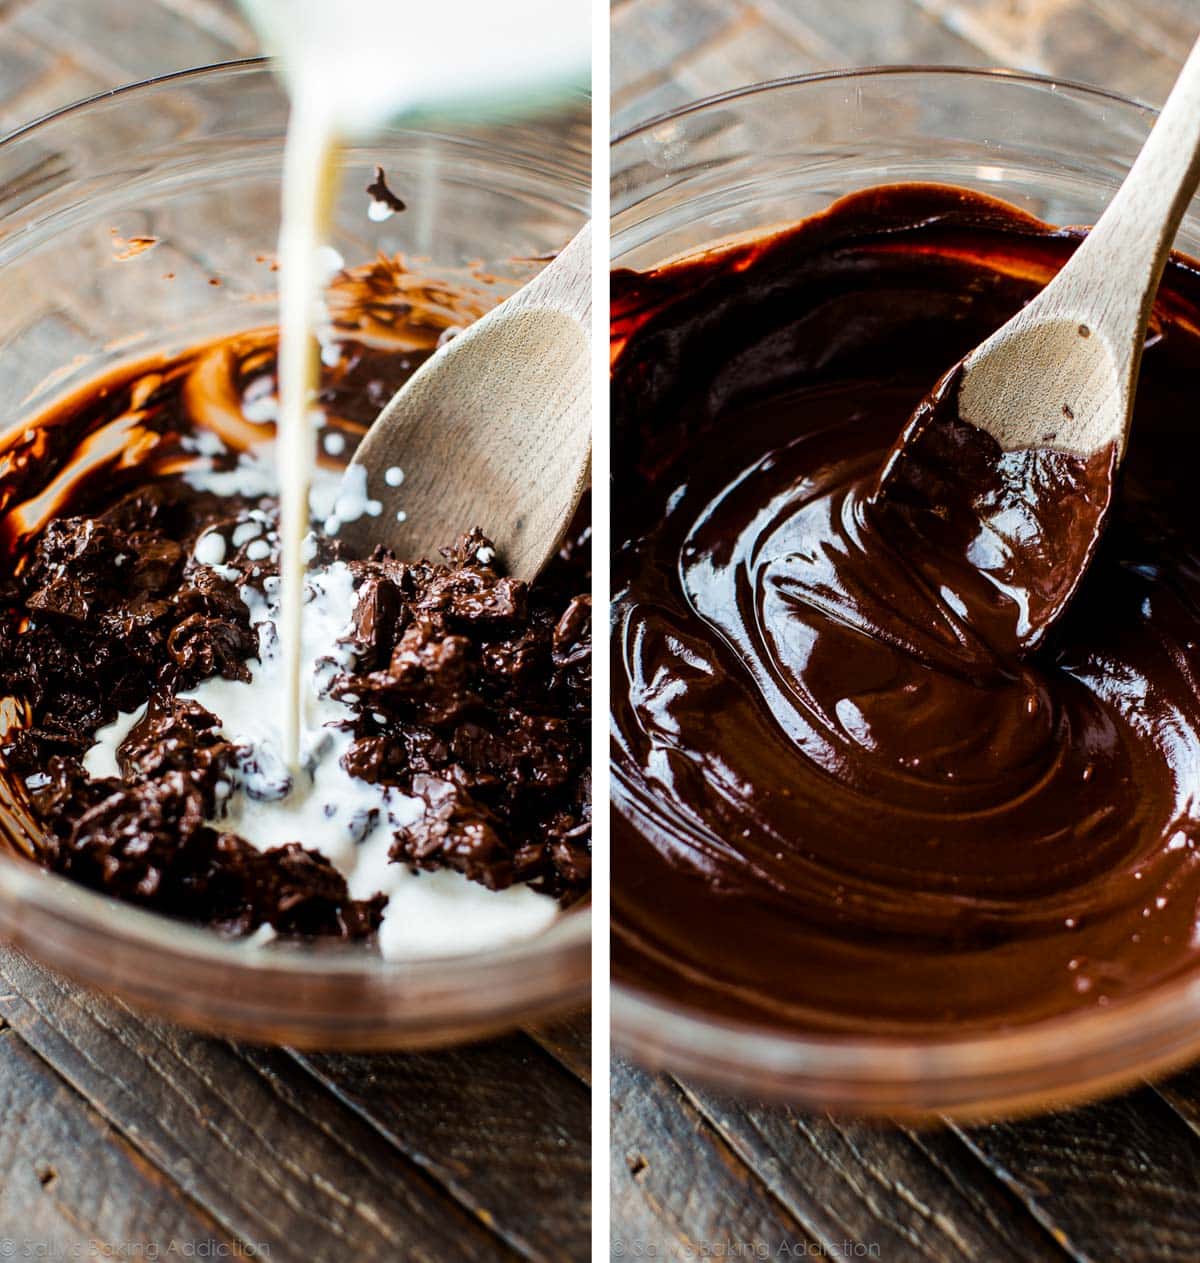 2 images of pouring cream into a glass bowl of melted chocolate and chocolate ganache in a glass bowl with a wood spoon